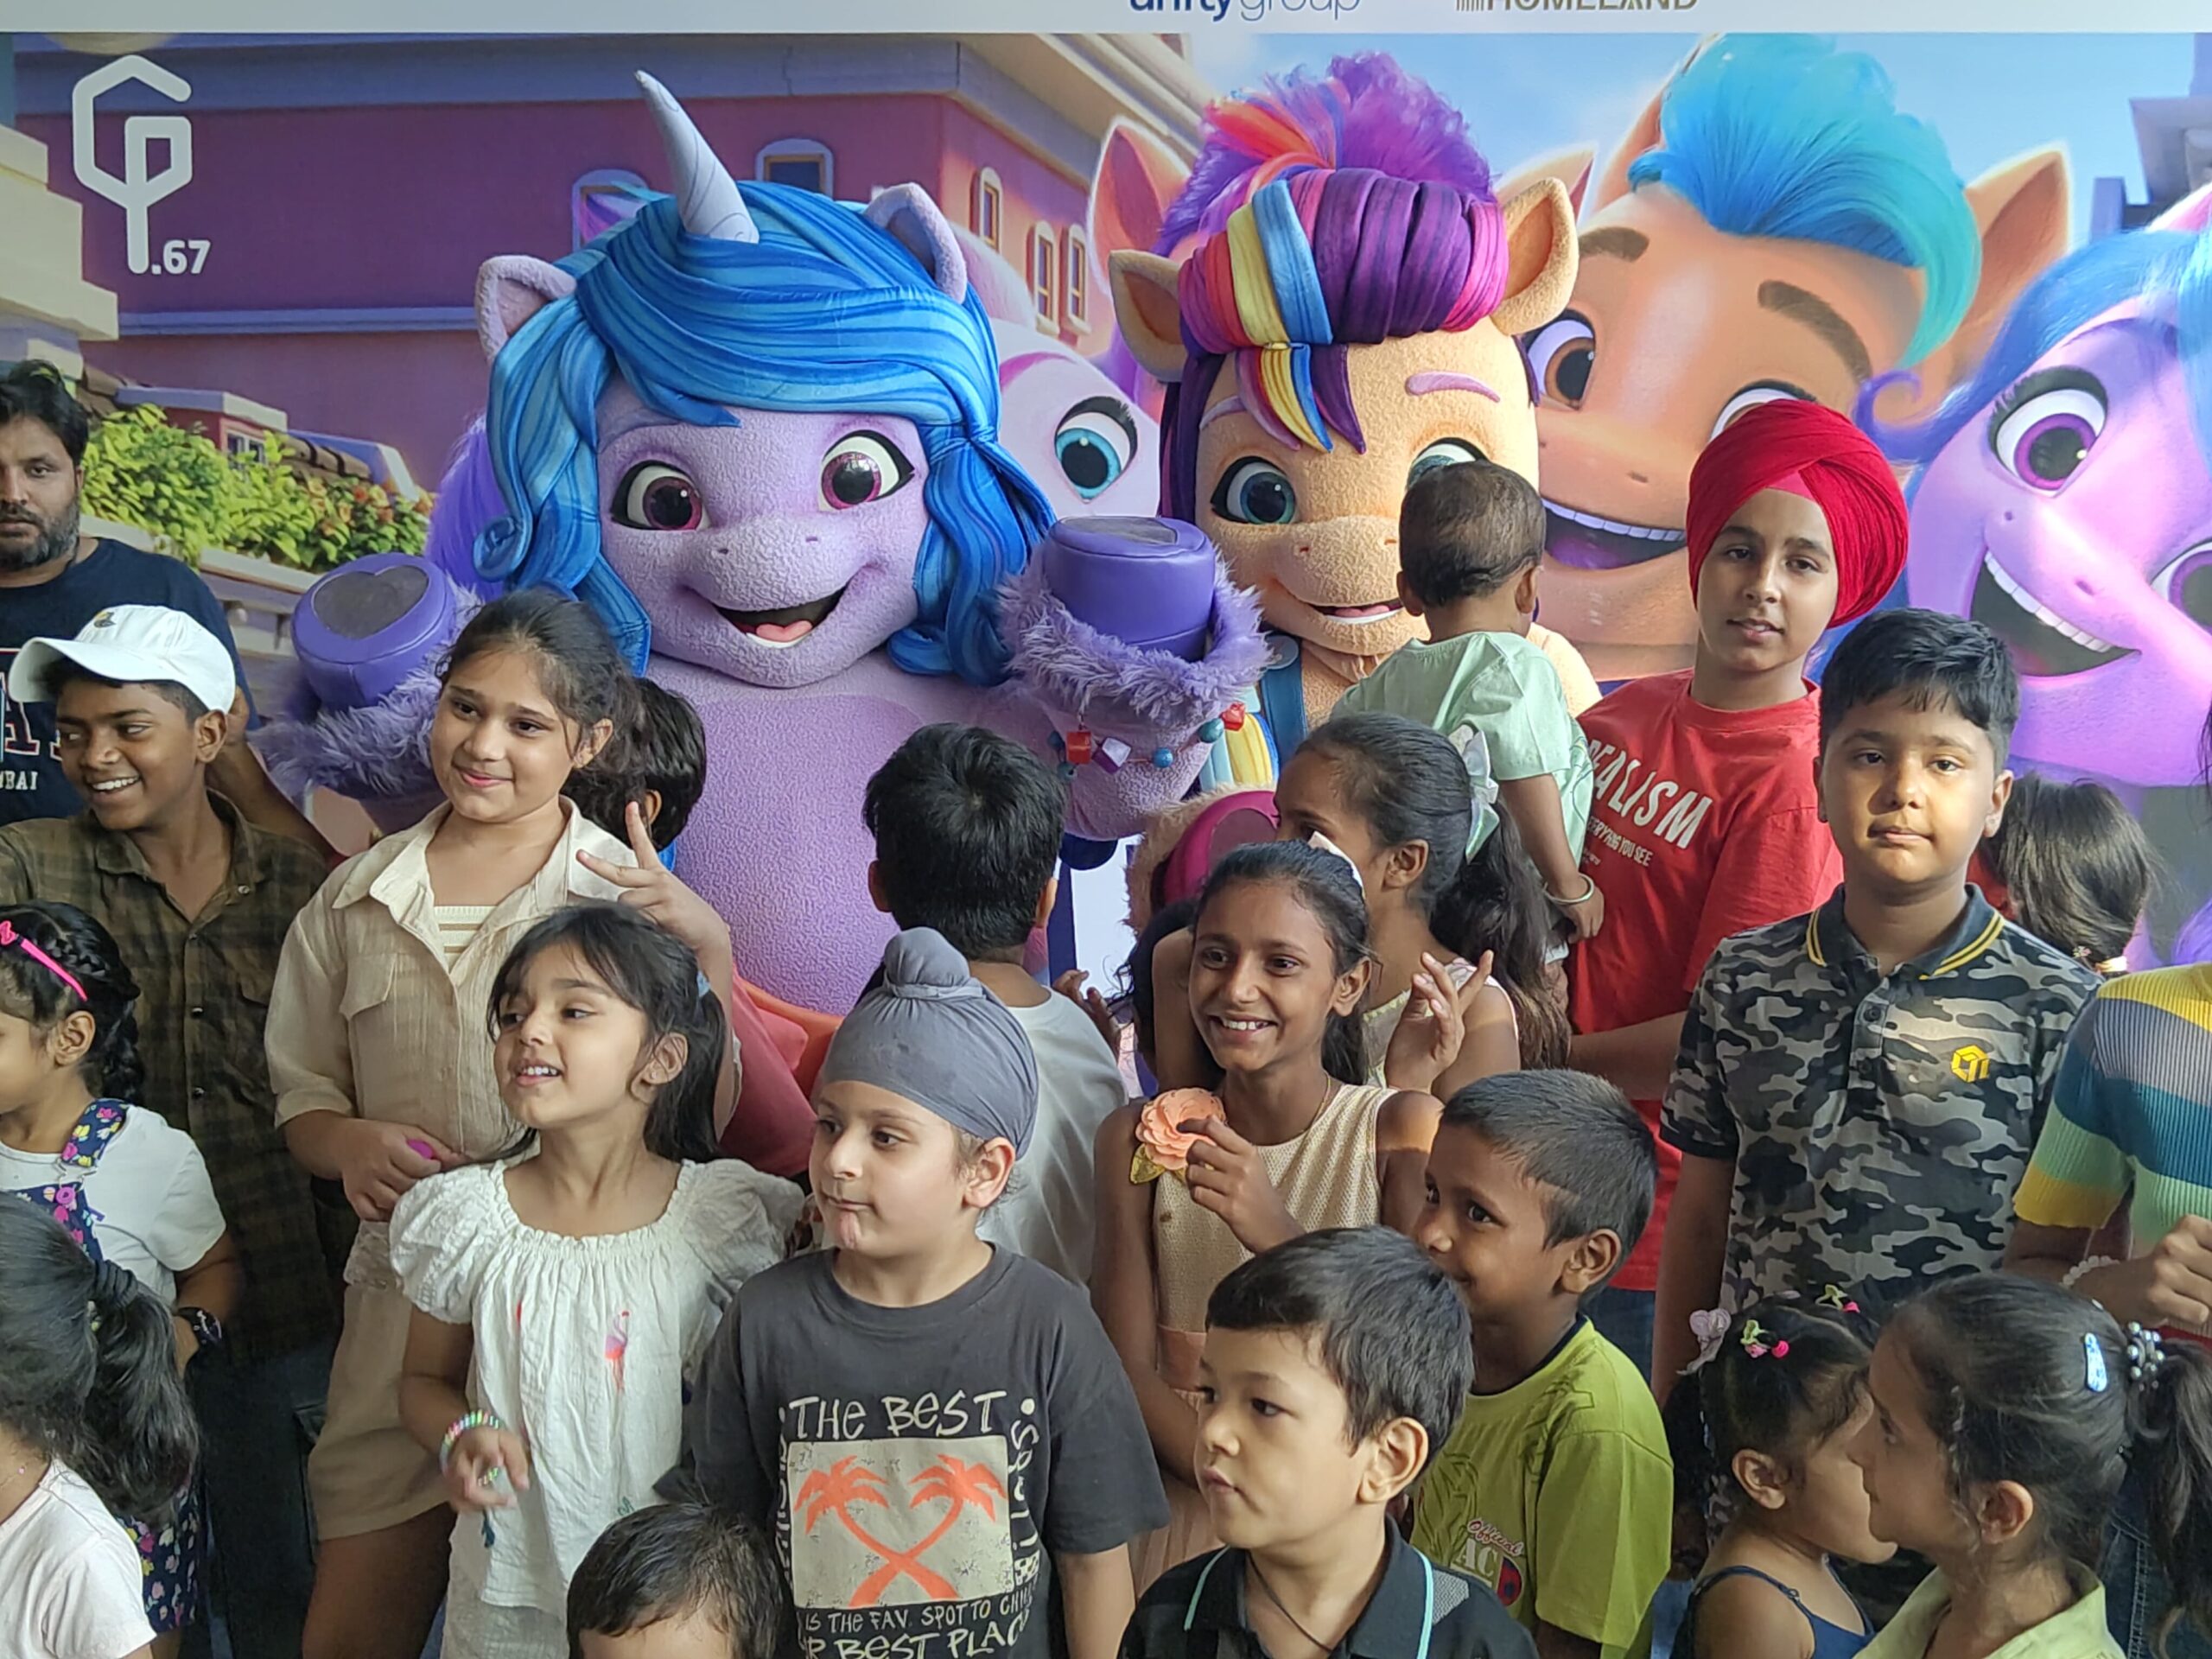 Exciting Meet & Greet with “My Little Pony” For Kids held at CP67 Mall, Mohali